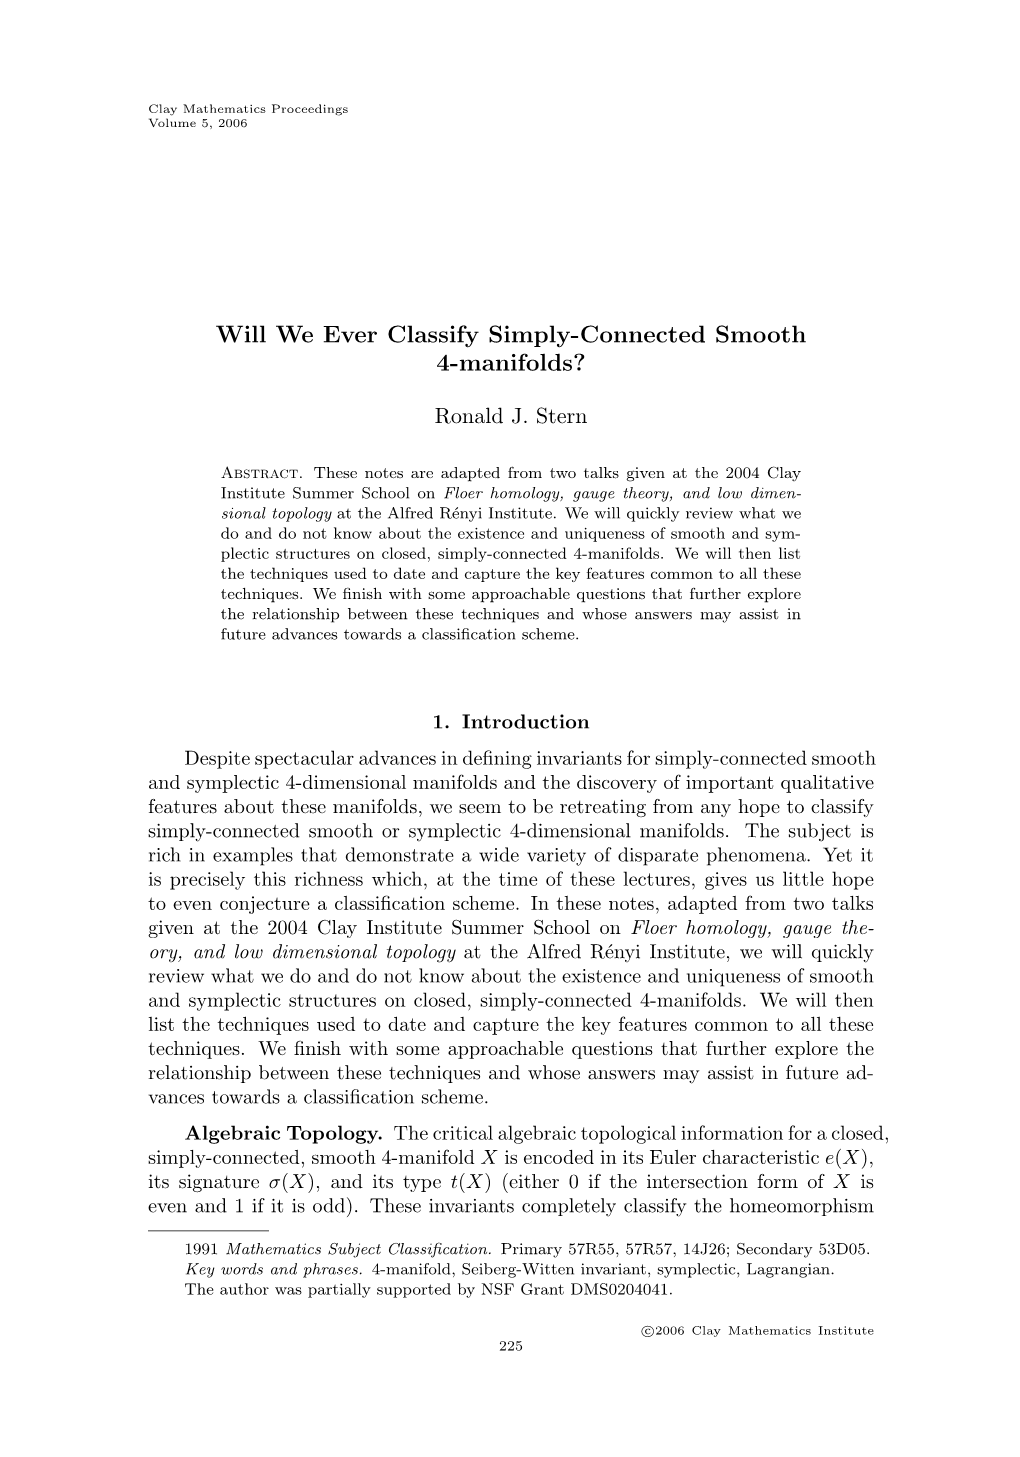 Will We Ever Classify Simply-Connected Smooth 4-Manifolds?